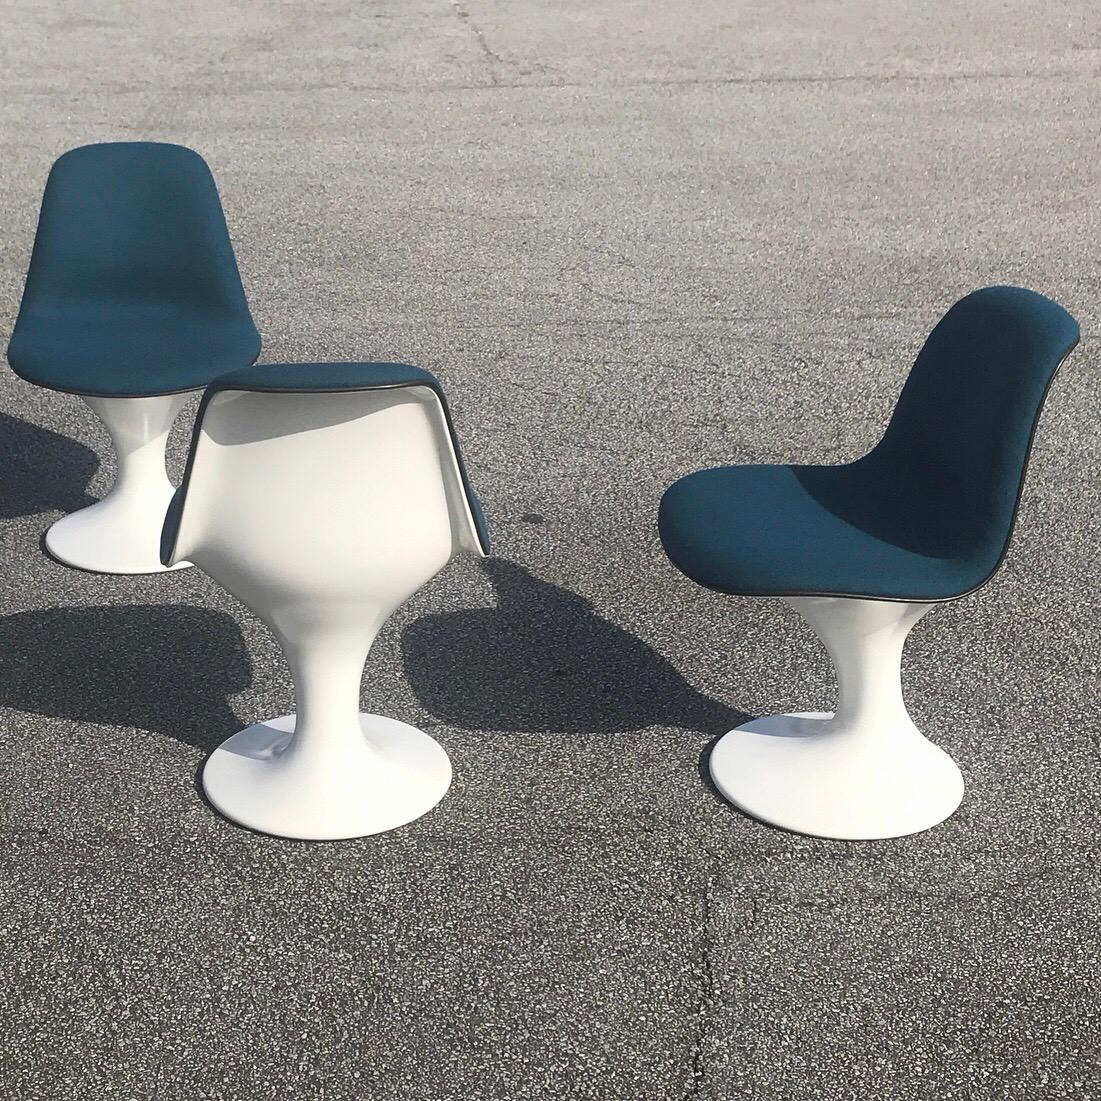 Beautiful space age orbit dining chairs by Markus Farner and Walter Grunder for Herman Miller, 1960s.

All chairs are fully refurbished with new soft white coat to the glassfiber and Danish petrol blue wool upholstery. All made by our professional